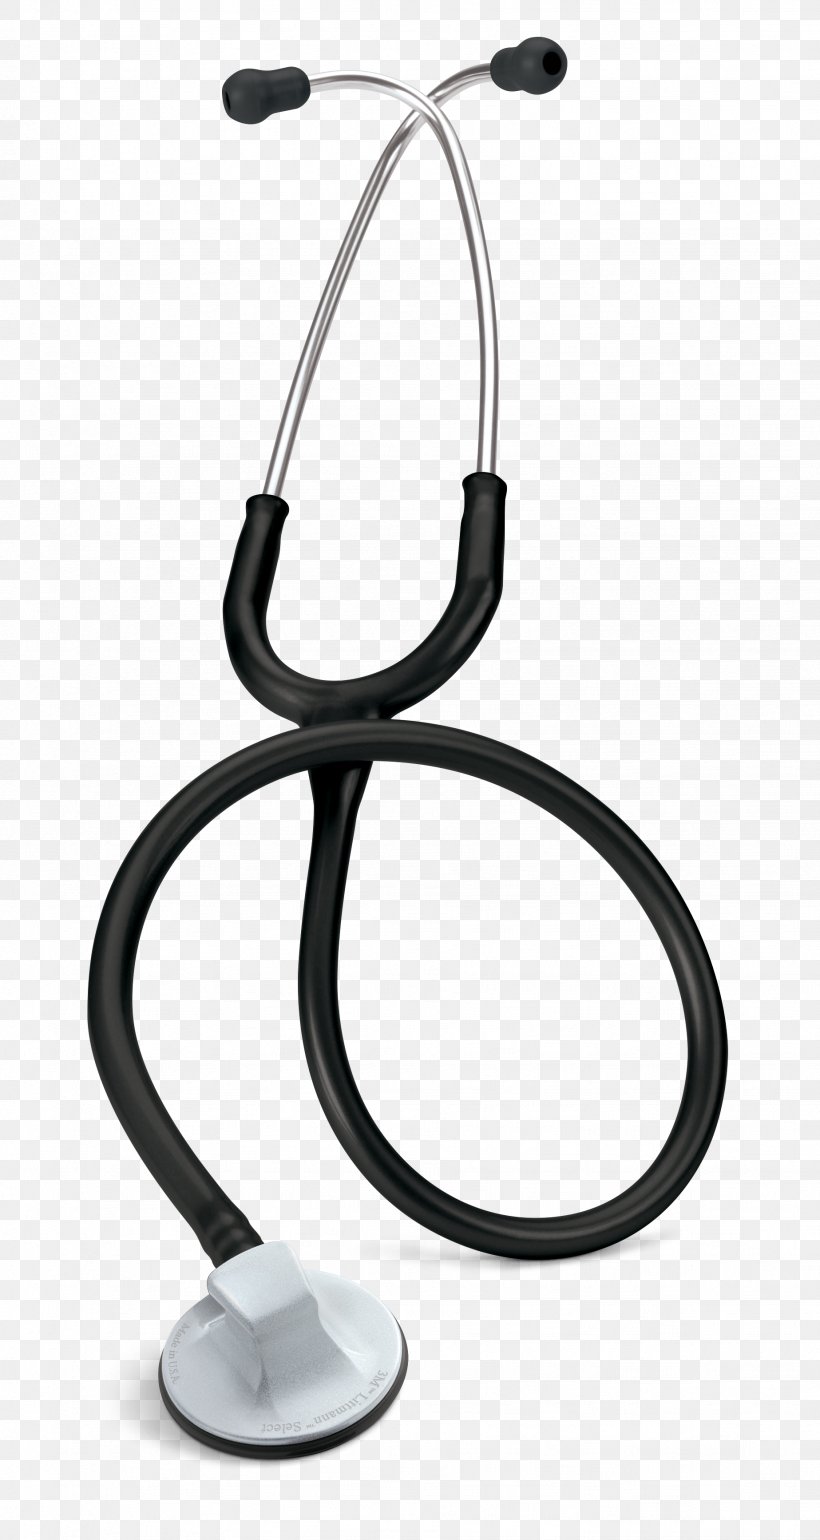 Stethoscope Cardiology Medicine Physical Examination Heart, PNG, 1847x3469px, Stethoscope, Blood, Blood Pressure, Blood Pressure Measurement, Cardiology Download Free